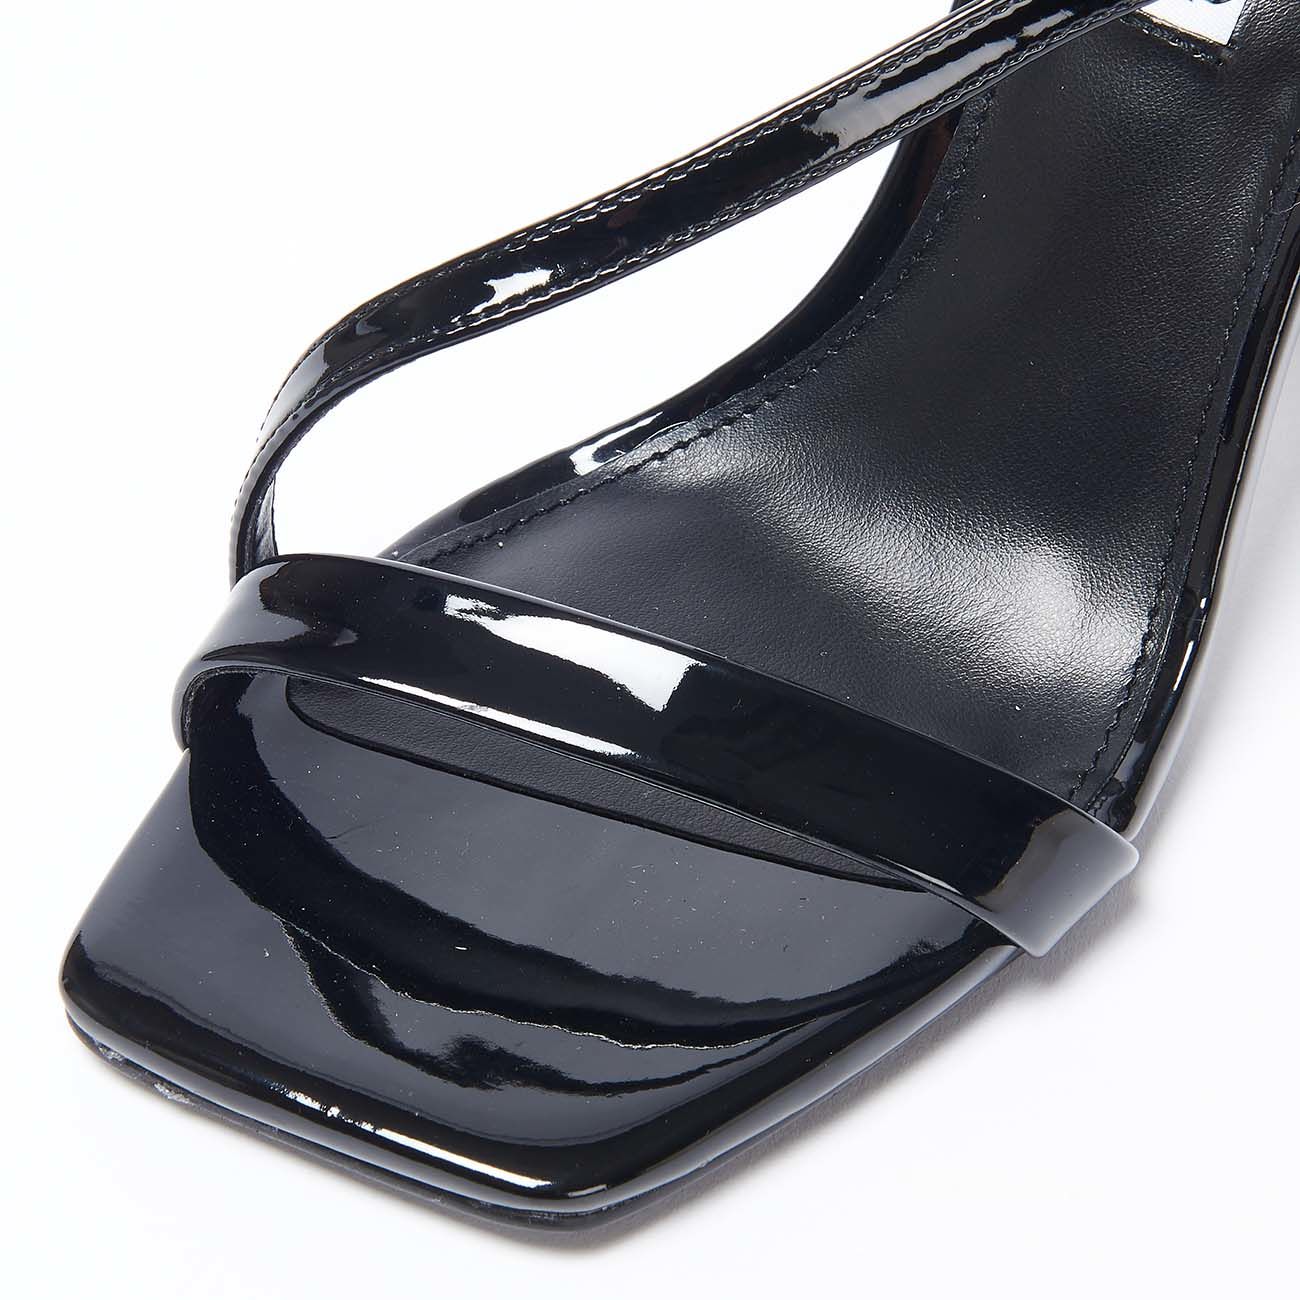 Patent leather sandals Chanel Black size 40 EU in Patent leather